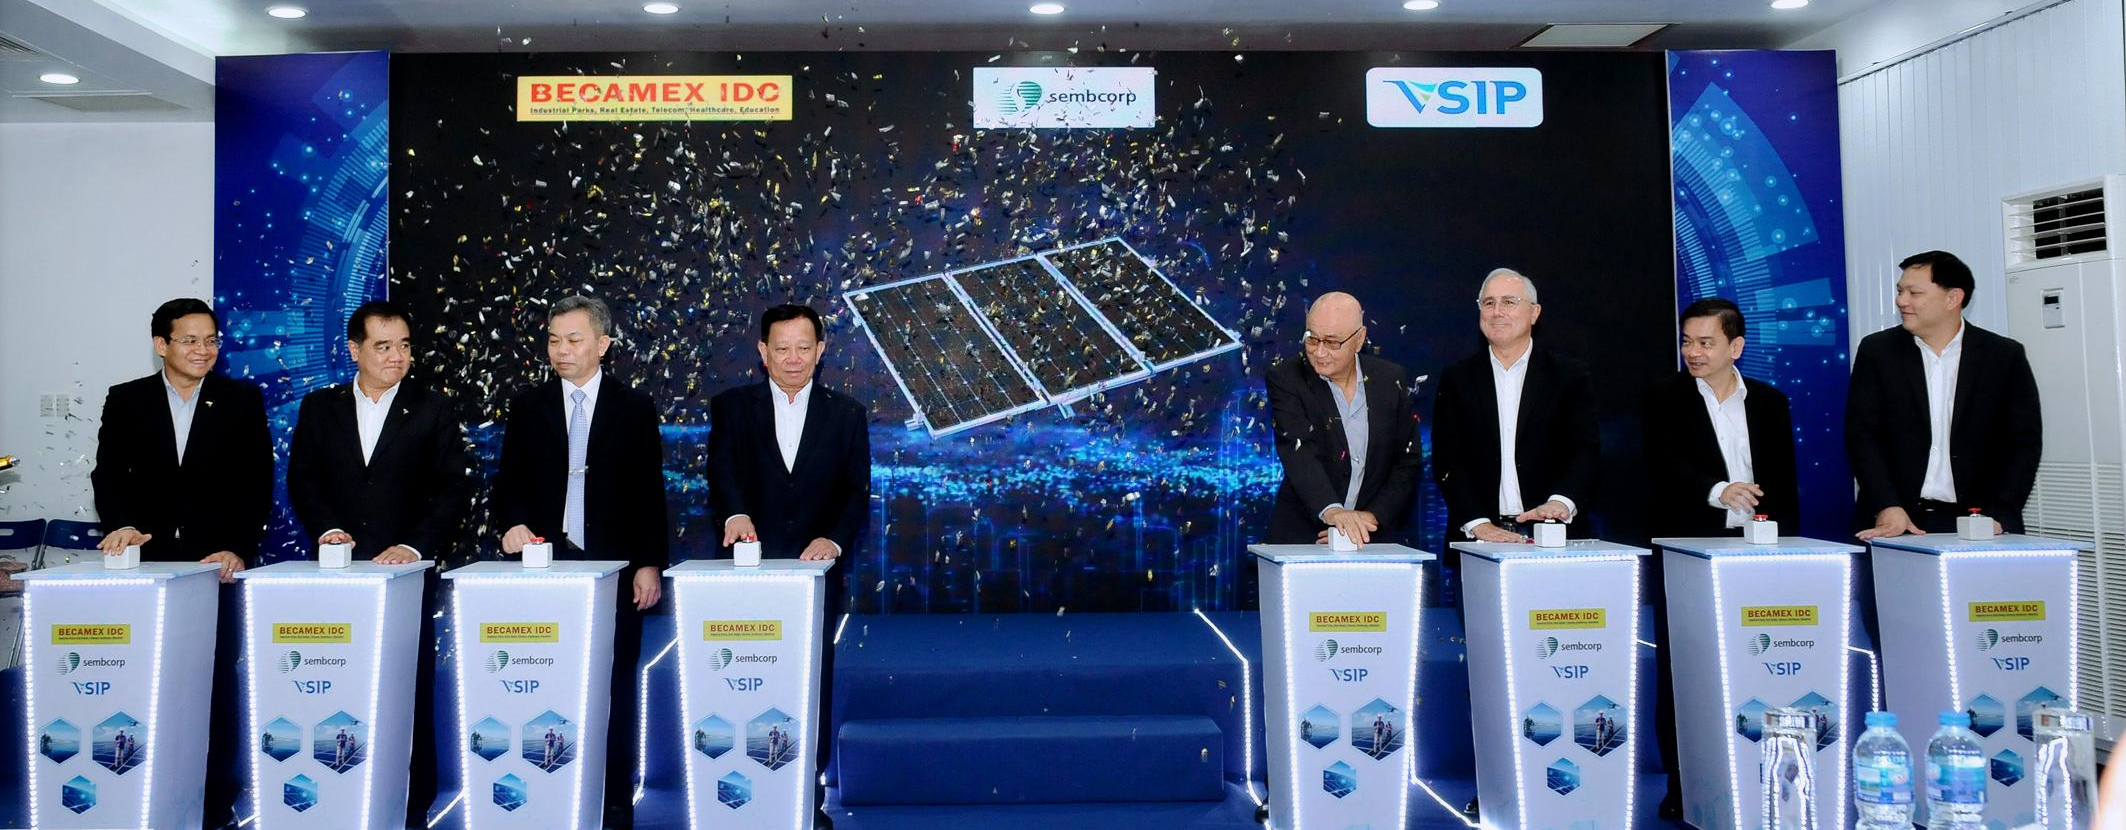 BECAMEX, SEMBCORP AND VSIP LAUNCH SUSTAINABLE SMART ENERGY SOLUTIONS IN VIETNAM